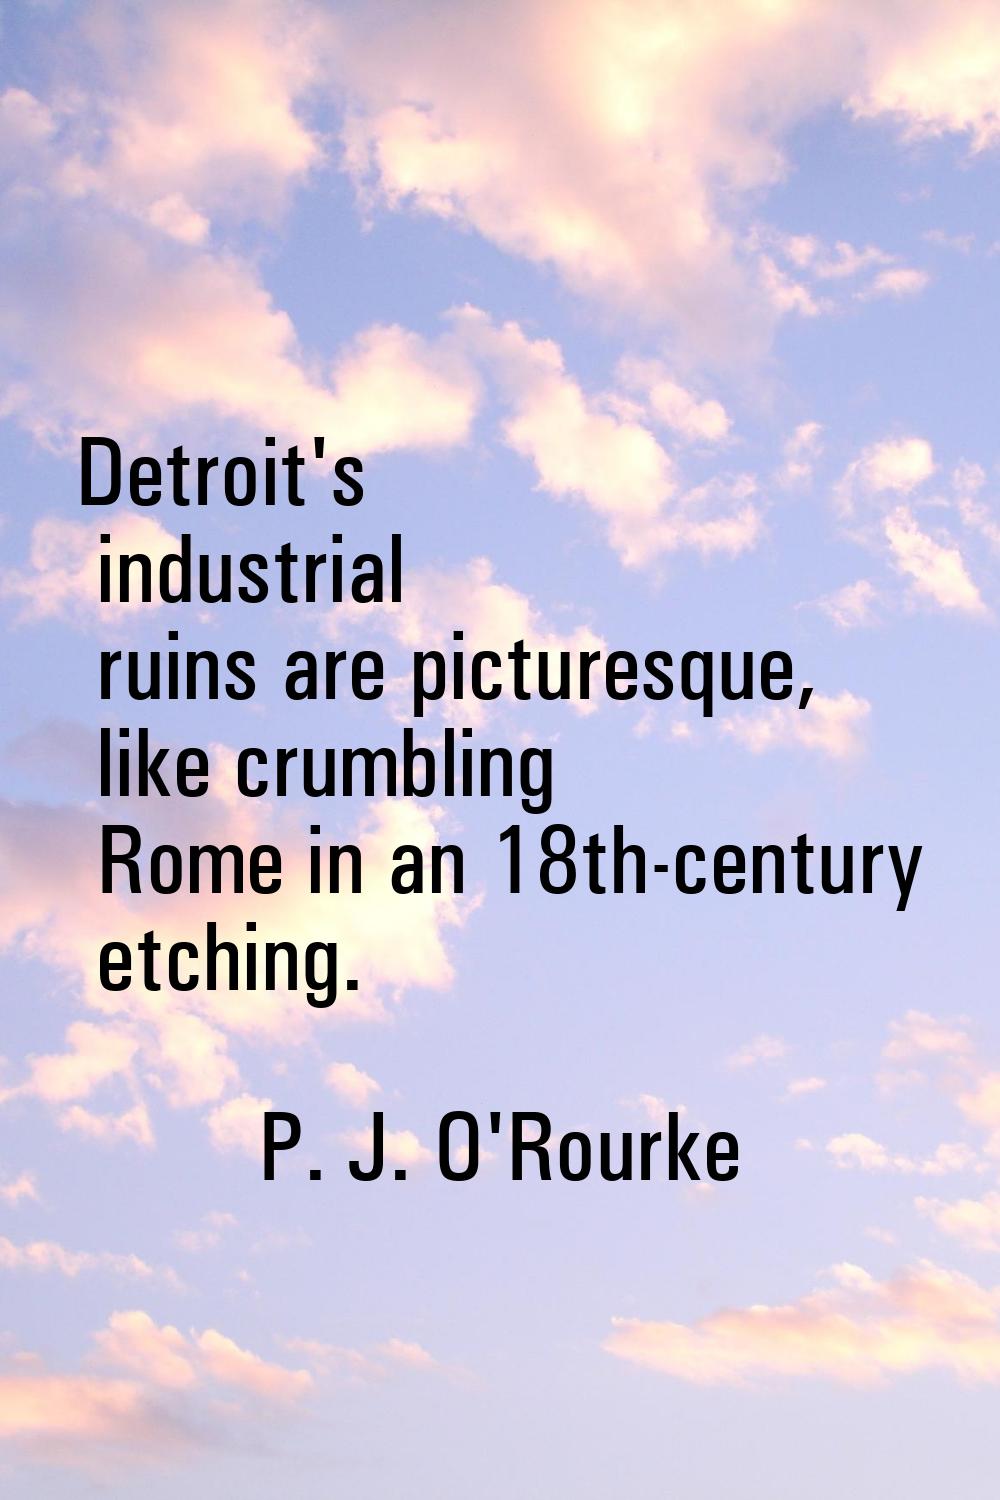 Detroit's industrial ruins are picturesque, like crumbling Rome in an 18th-century etching.